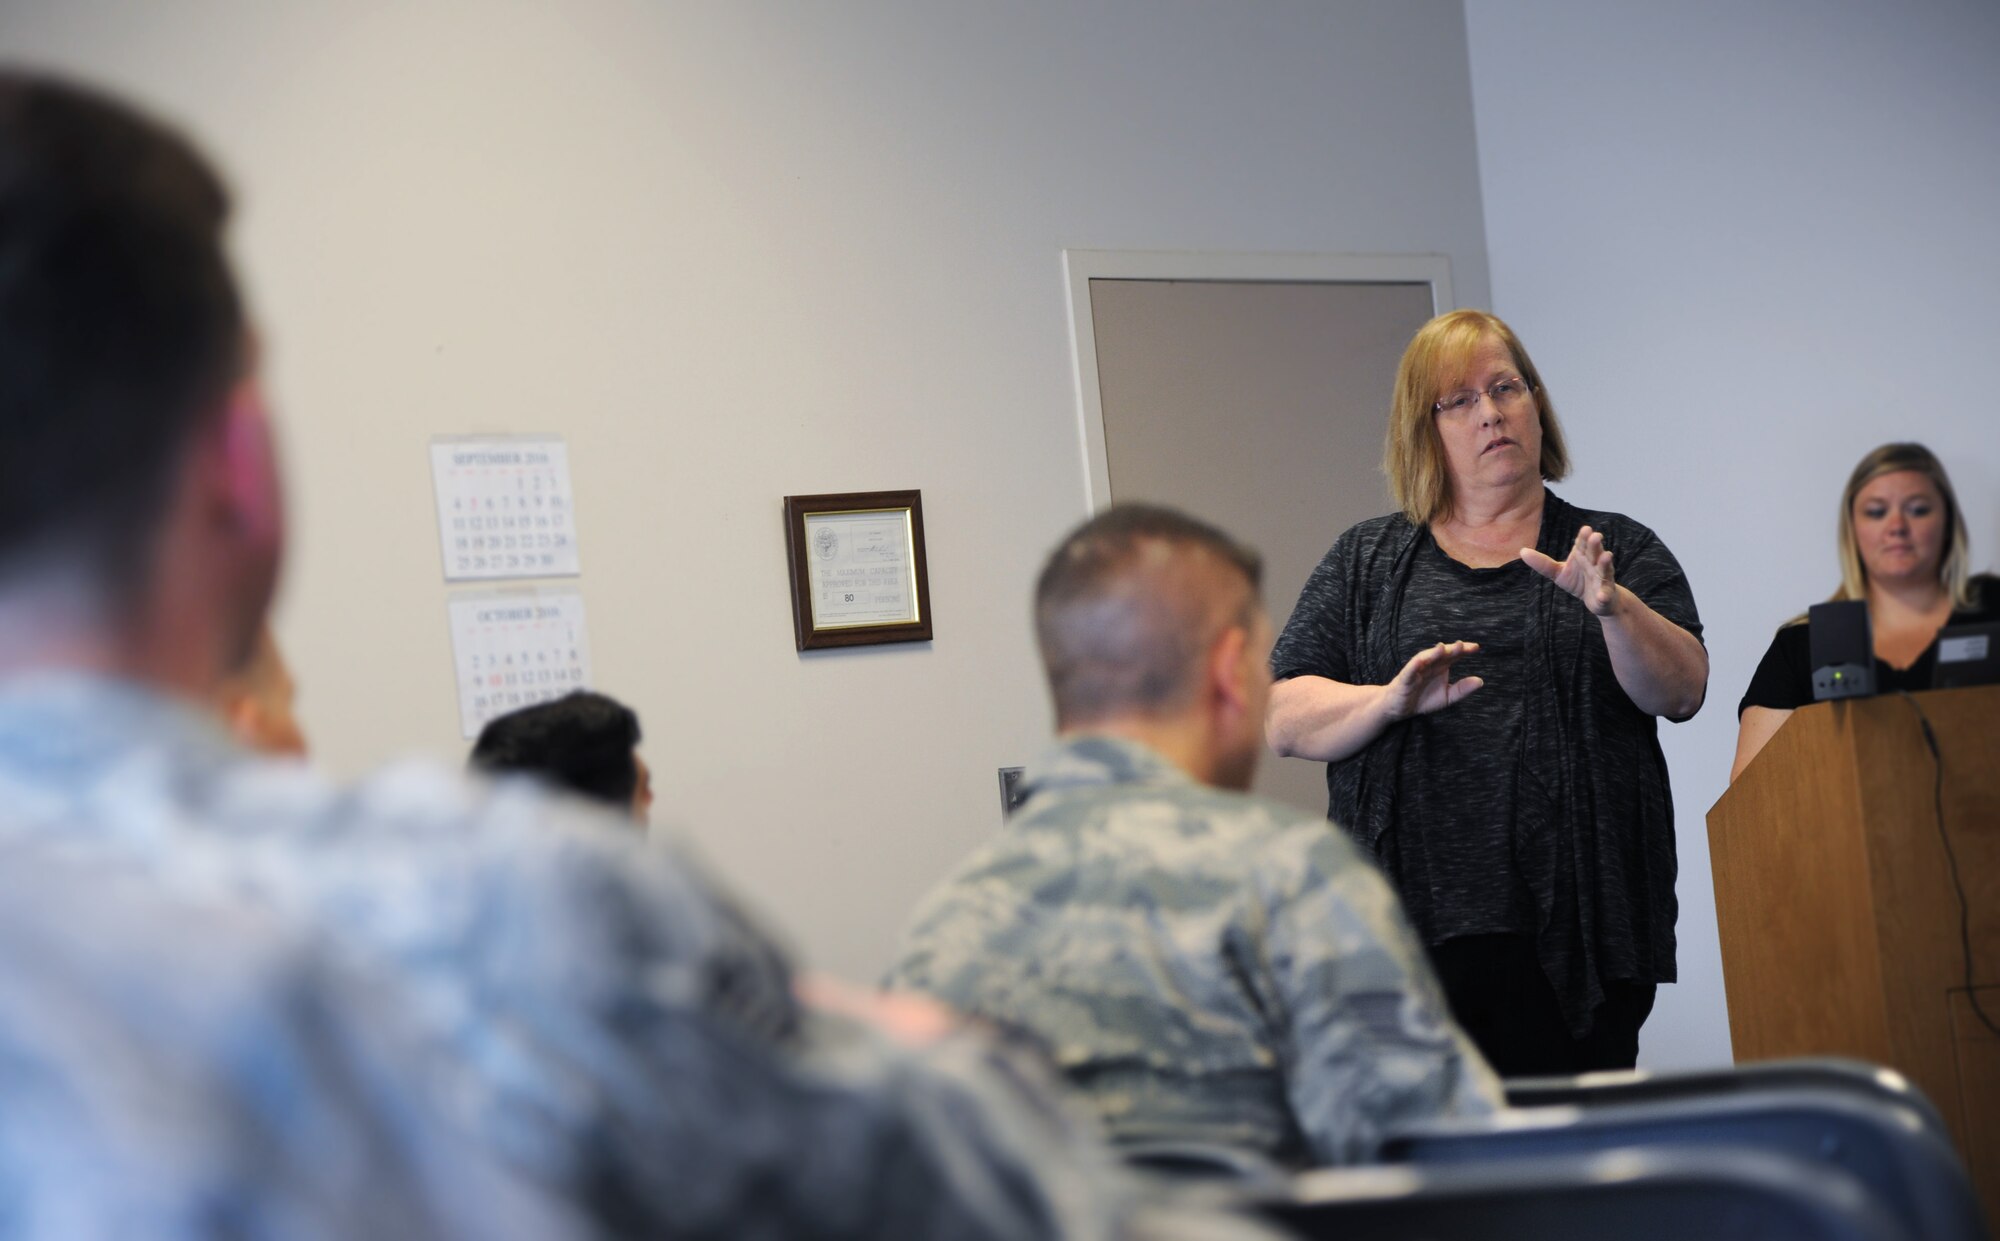 Answering questions from Airmen of the 142nd Fighter Wing during the monthly Wing Diversity and Inclusion Counsel meeting, Portland Air National Guard Base, Ore., Sept. 11, 2016, Jenn Burleton, executive director for TransActive Gender Center, Portland, right, discussed some of the changes regarding transgendered service members with recent DoD policies. (U.S. Air National Guard photo by Tech. Sgt. John Hughel, 142nd Fighter Wing Public Affairs/Released)